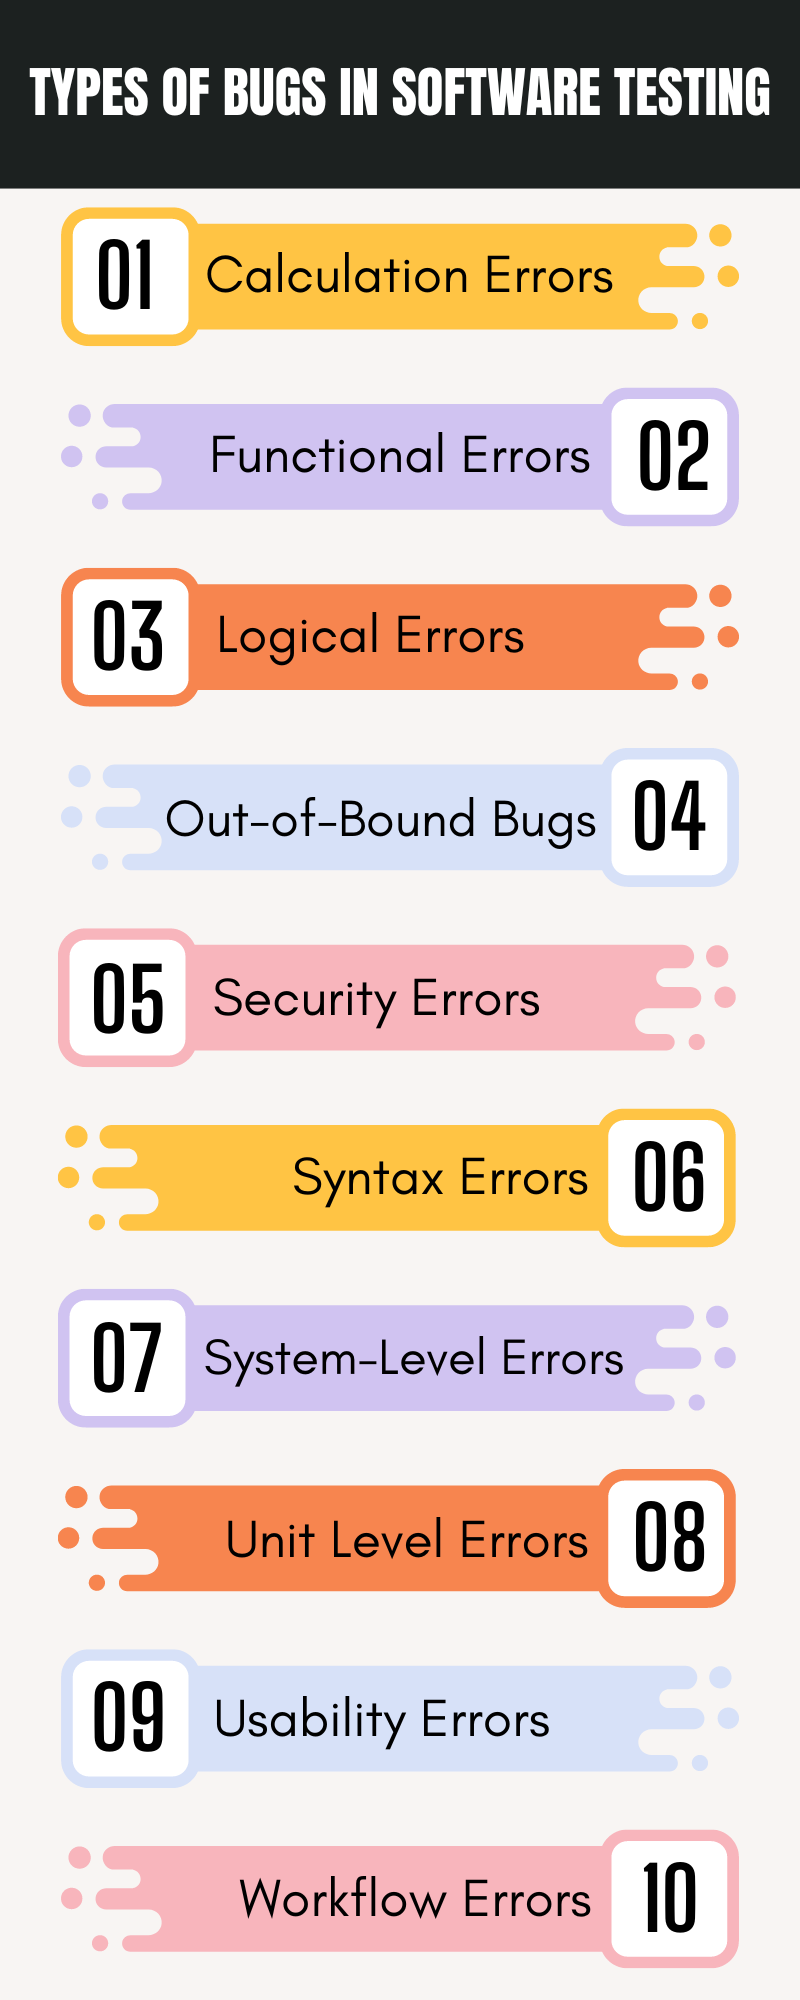 Types of Bugs in Software Testing